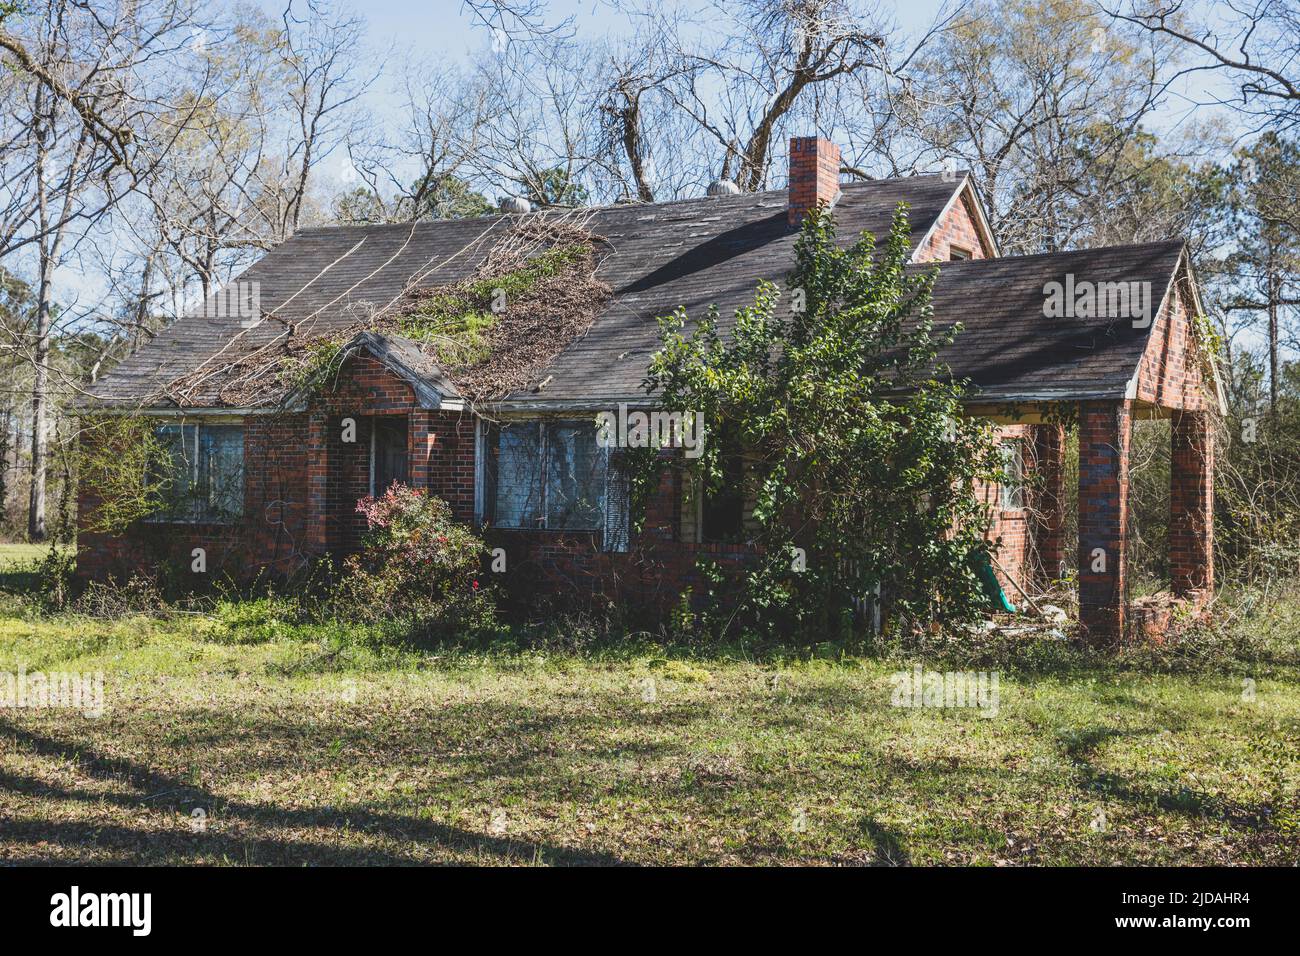 A rural homestead or small house abandoned and crumbling, overgrown with plants and shrubs. Stock Photo